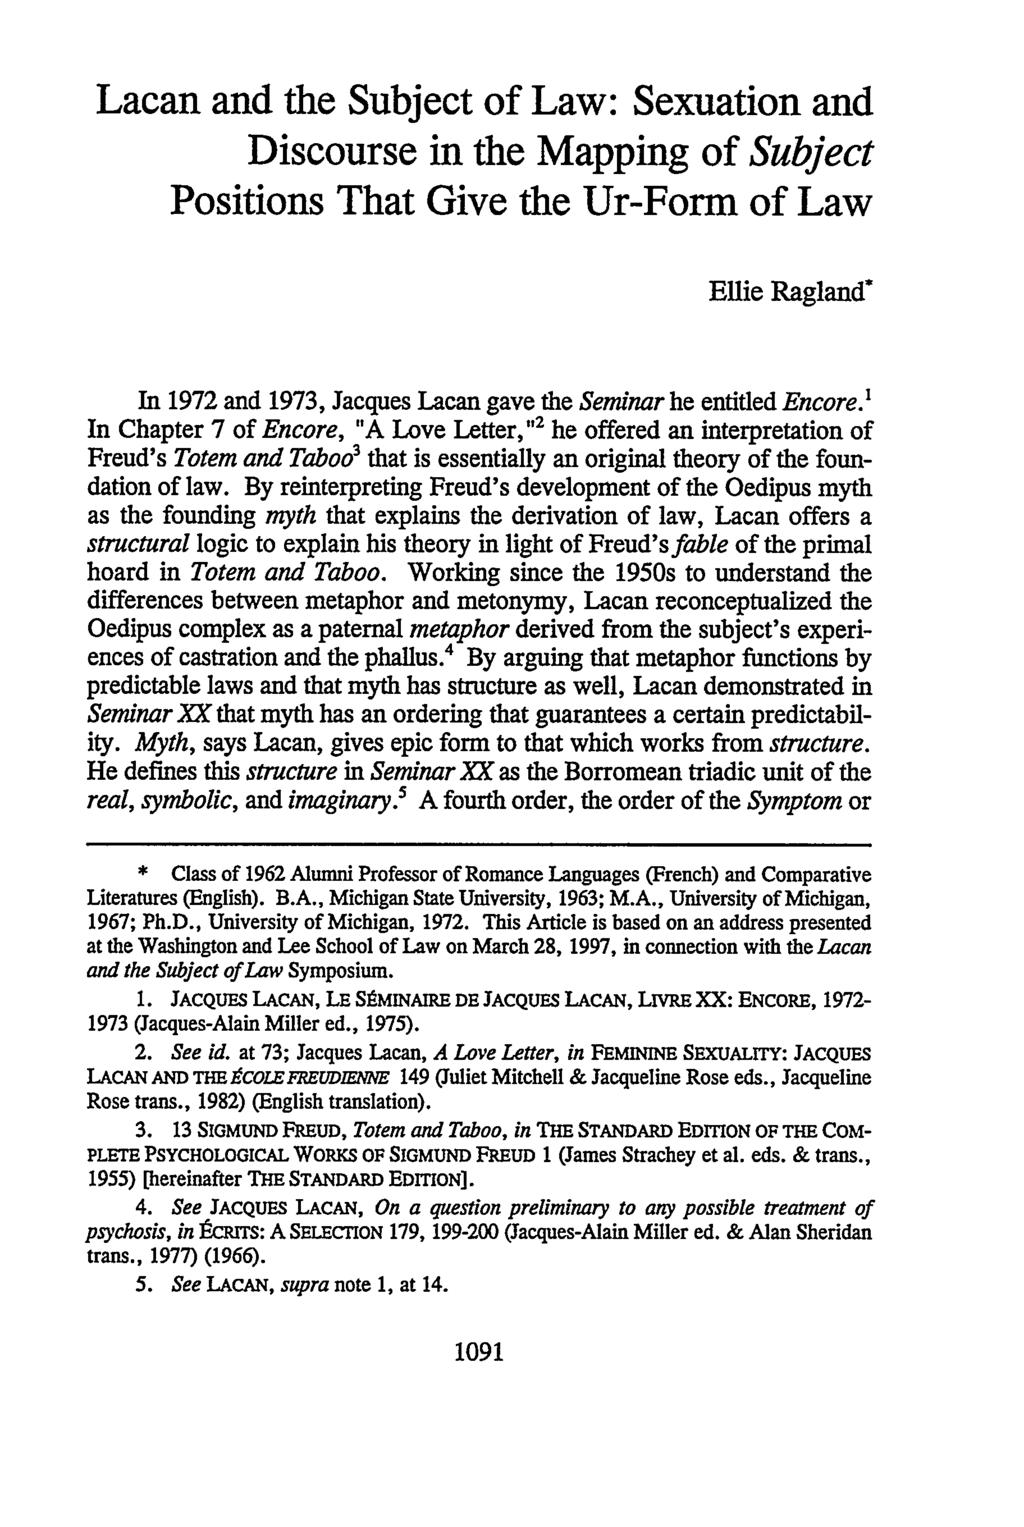 Lacan and the Subject of Law: Sexuation and Discourse in the Mapping of Subject Positions That Give the Ur-Form of Law Ellie Ragland* In 1972 and 1973, Jacques Lacan gave the Seminar he entitled